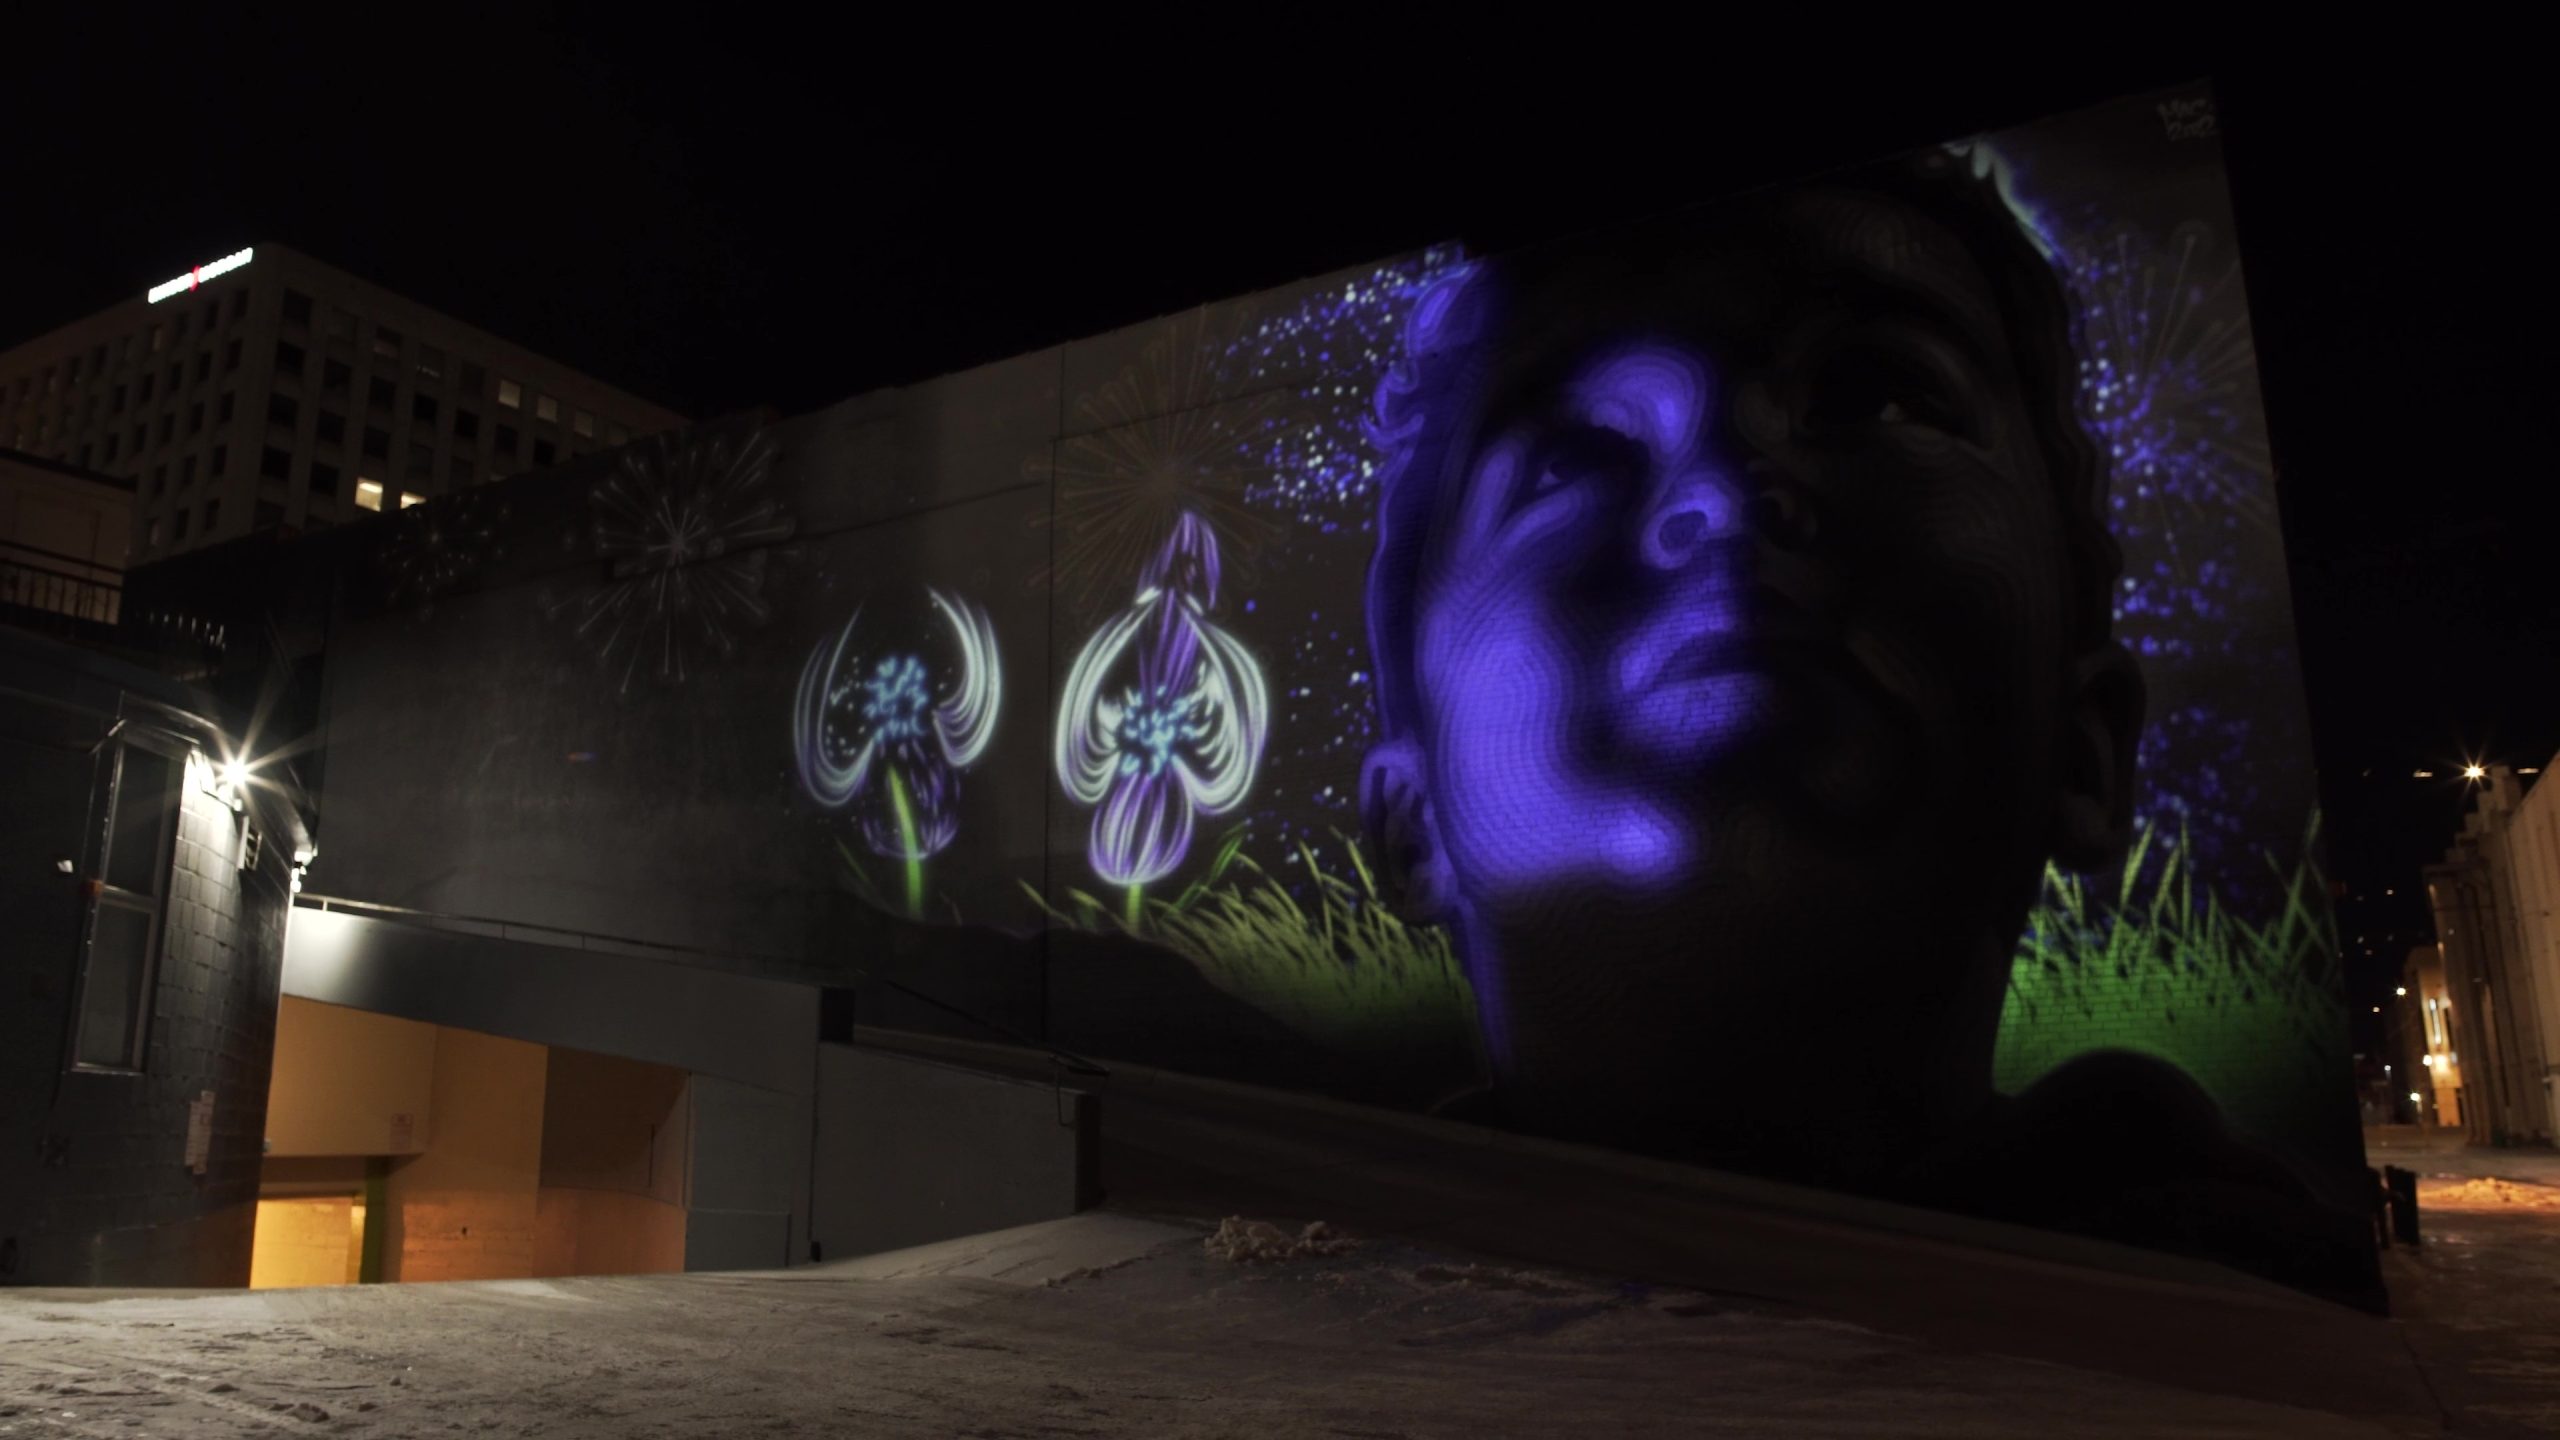 “Mountain Majesty” Projection Mapping Mural in Colorado Springs, USA